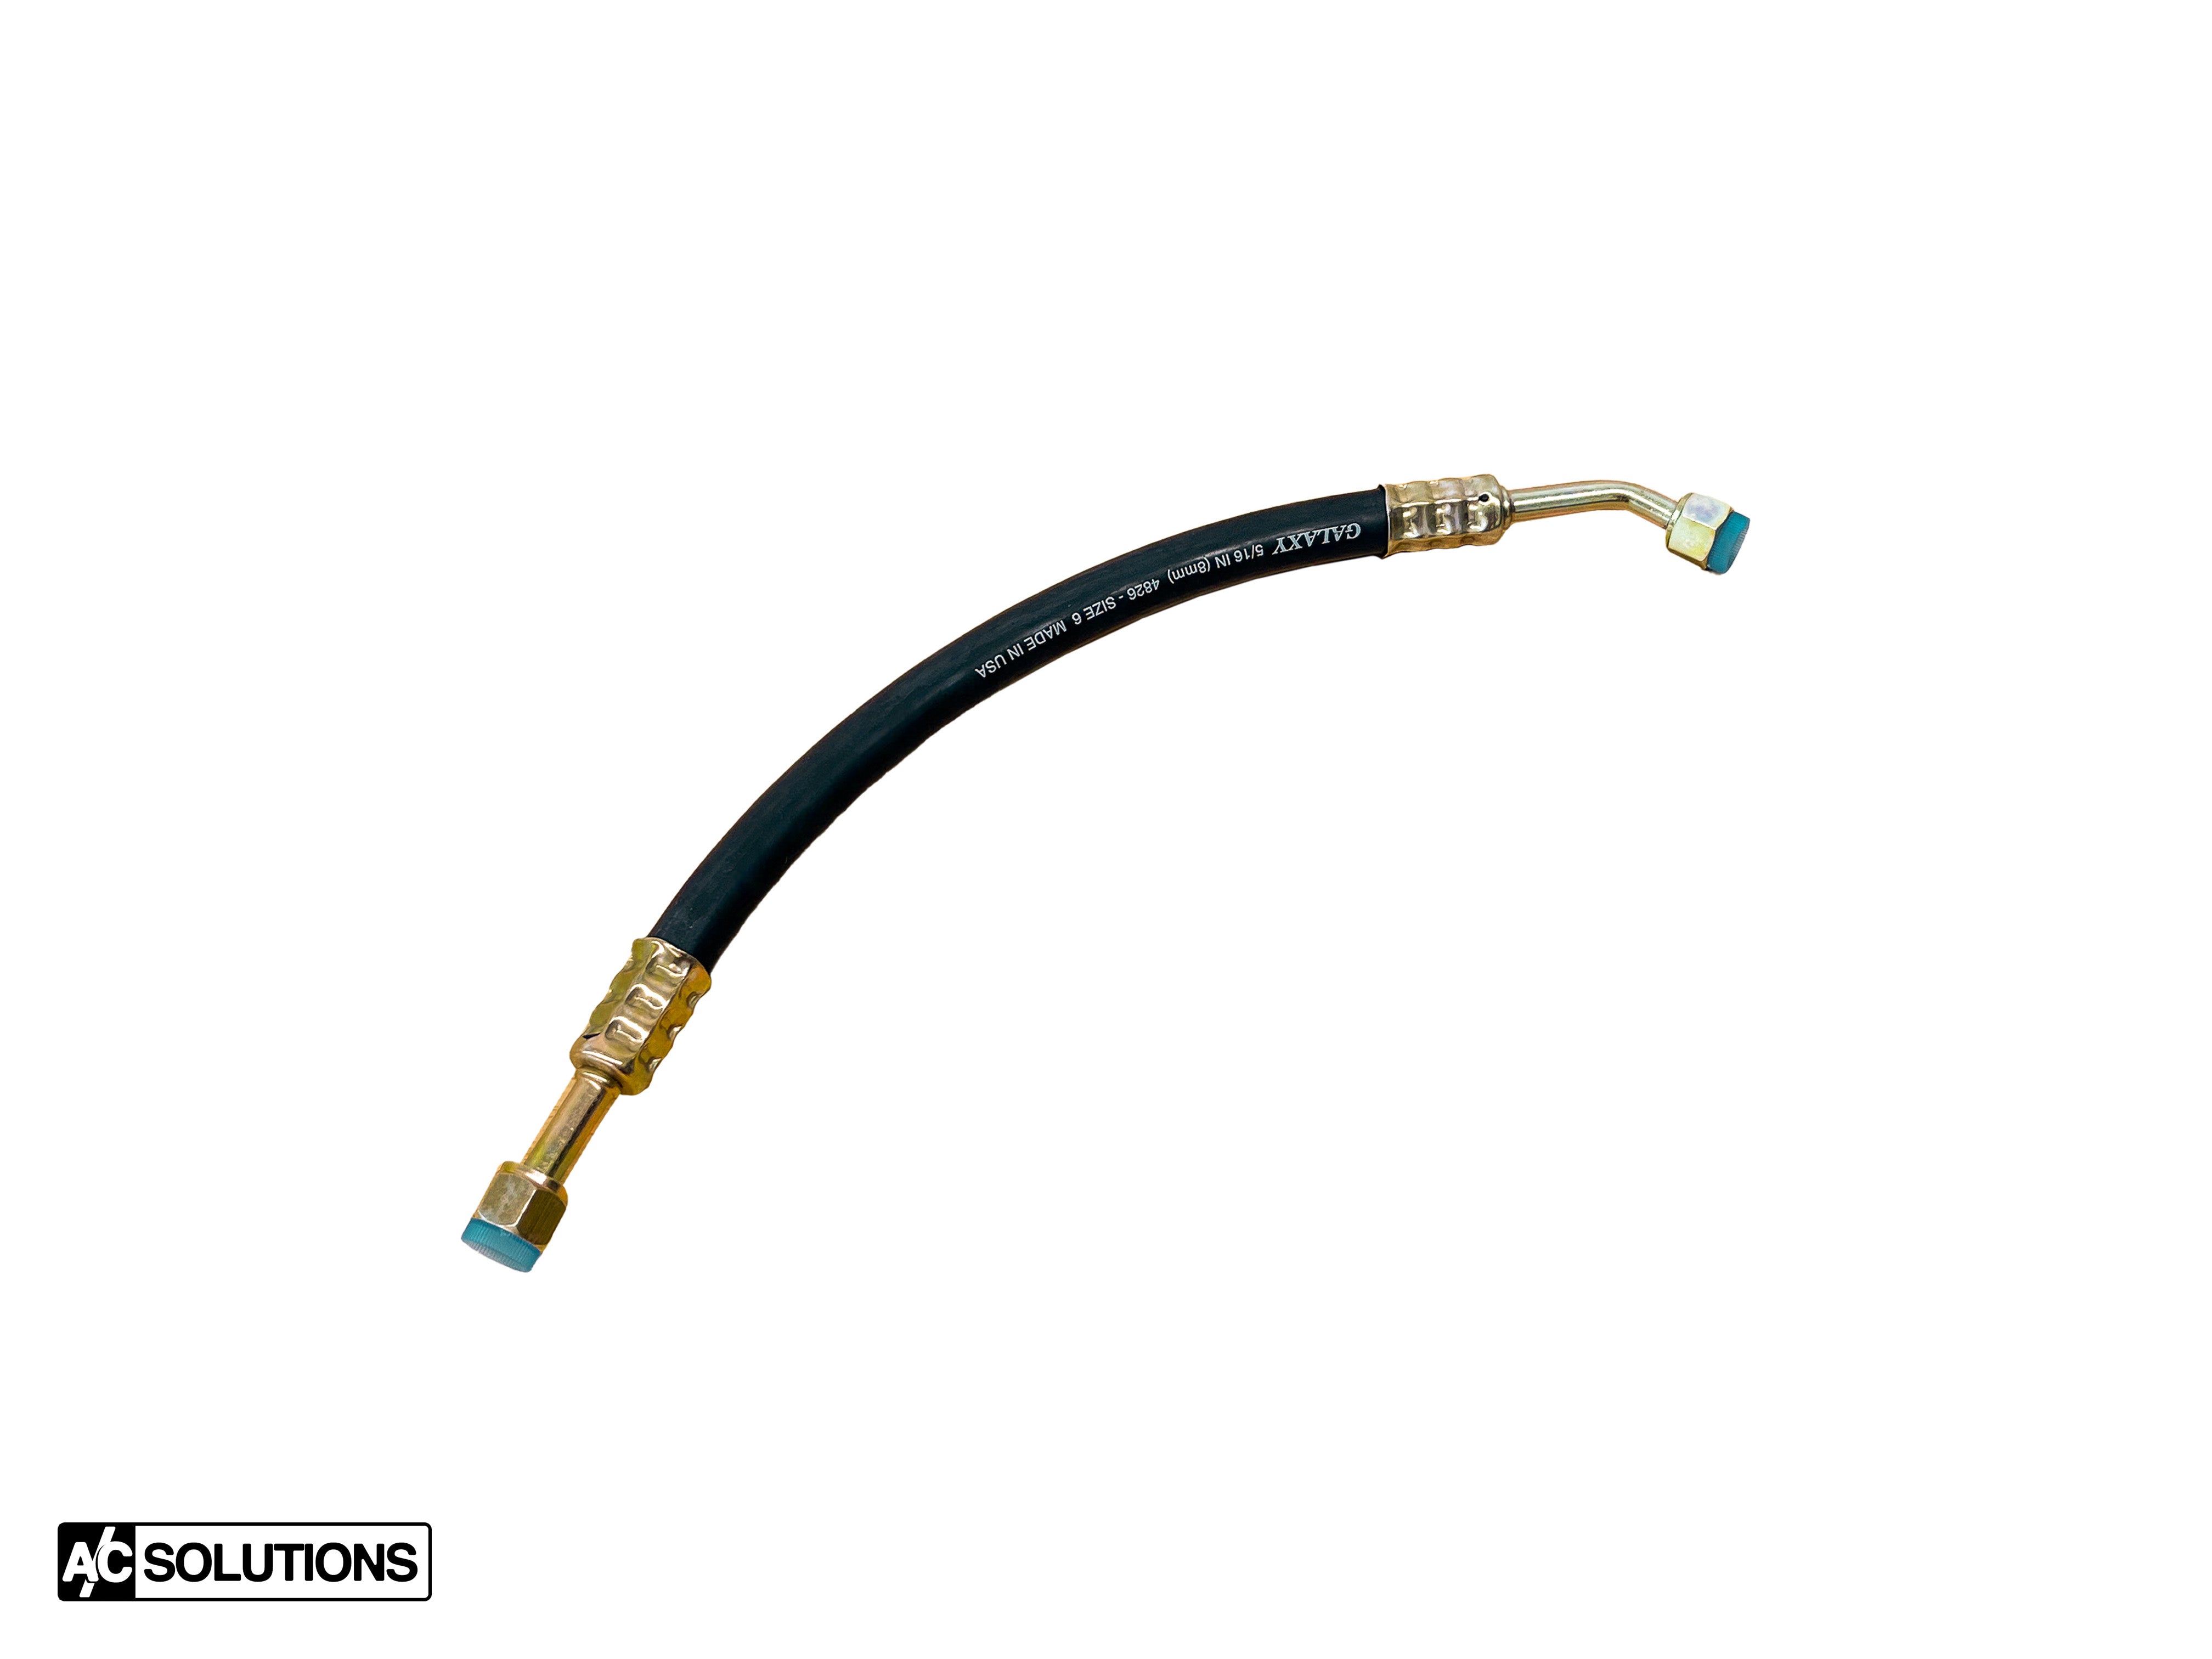 A/C Solutions BMW E30 High-Pressure Condenser Return Line (early model) (64539067572)